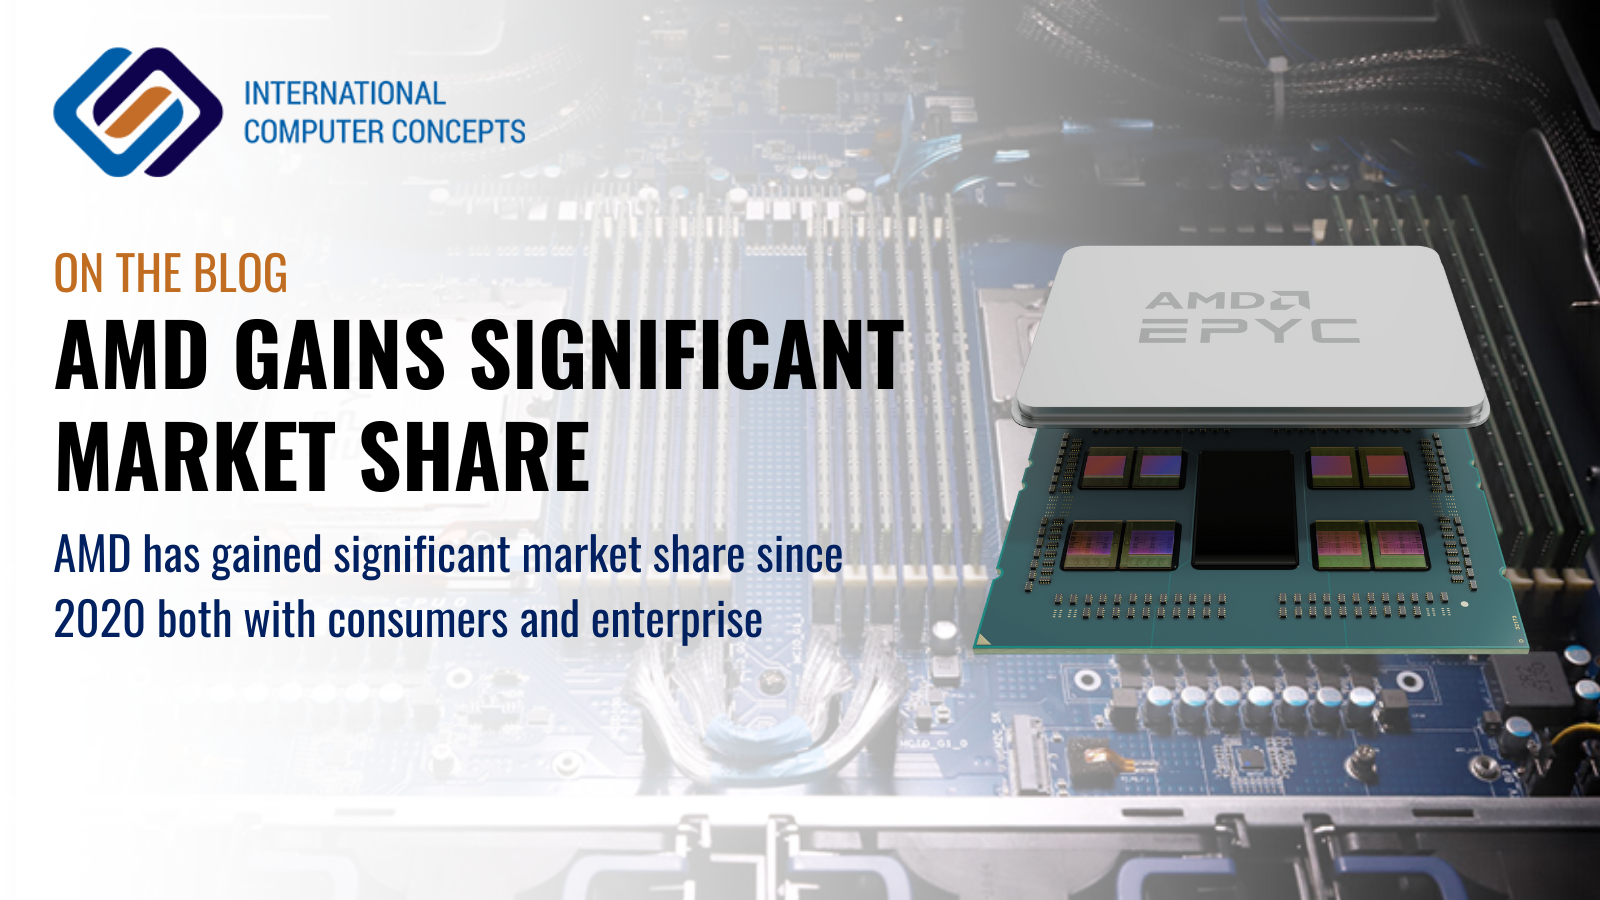 AMD gaining significant market share for the server CPUs